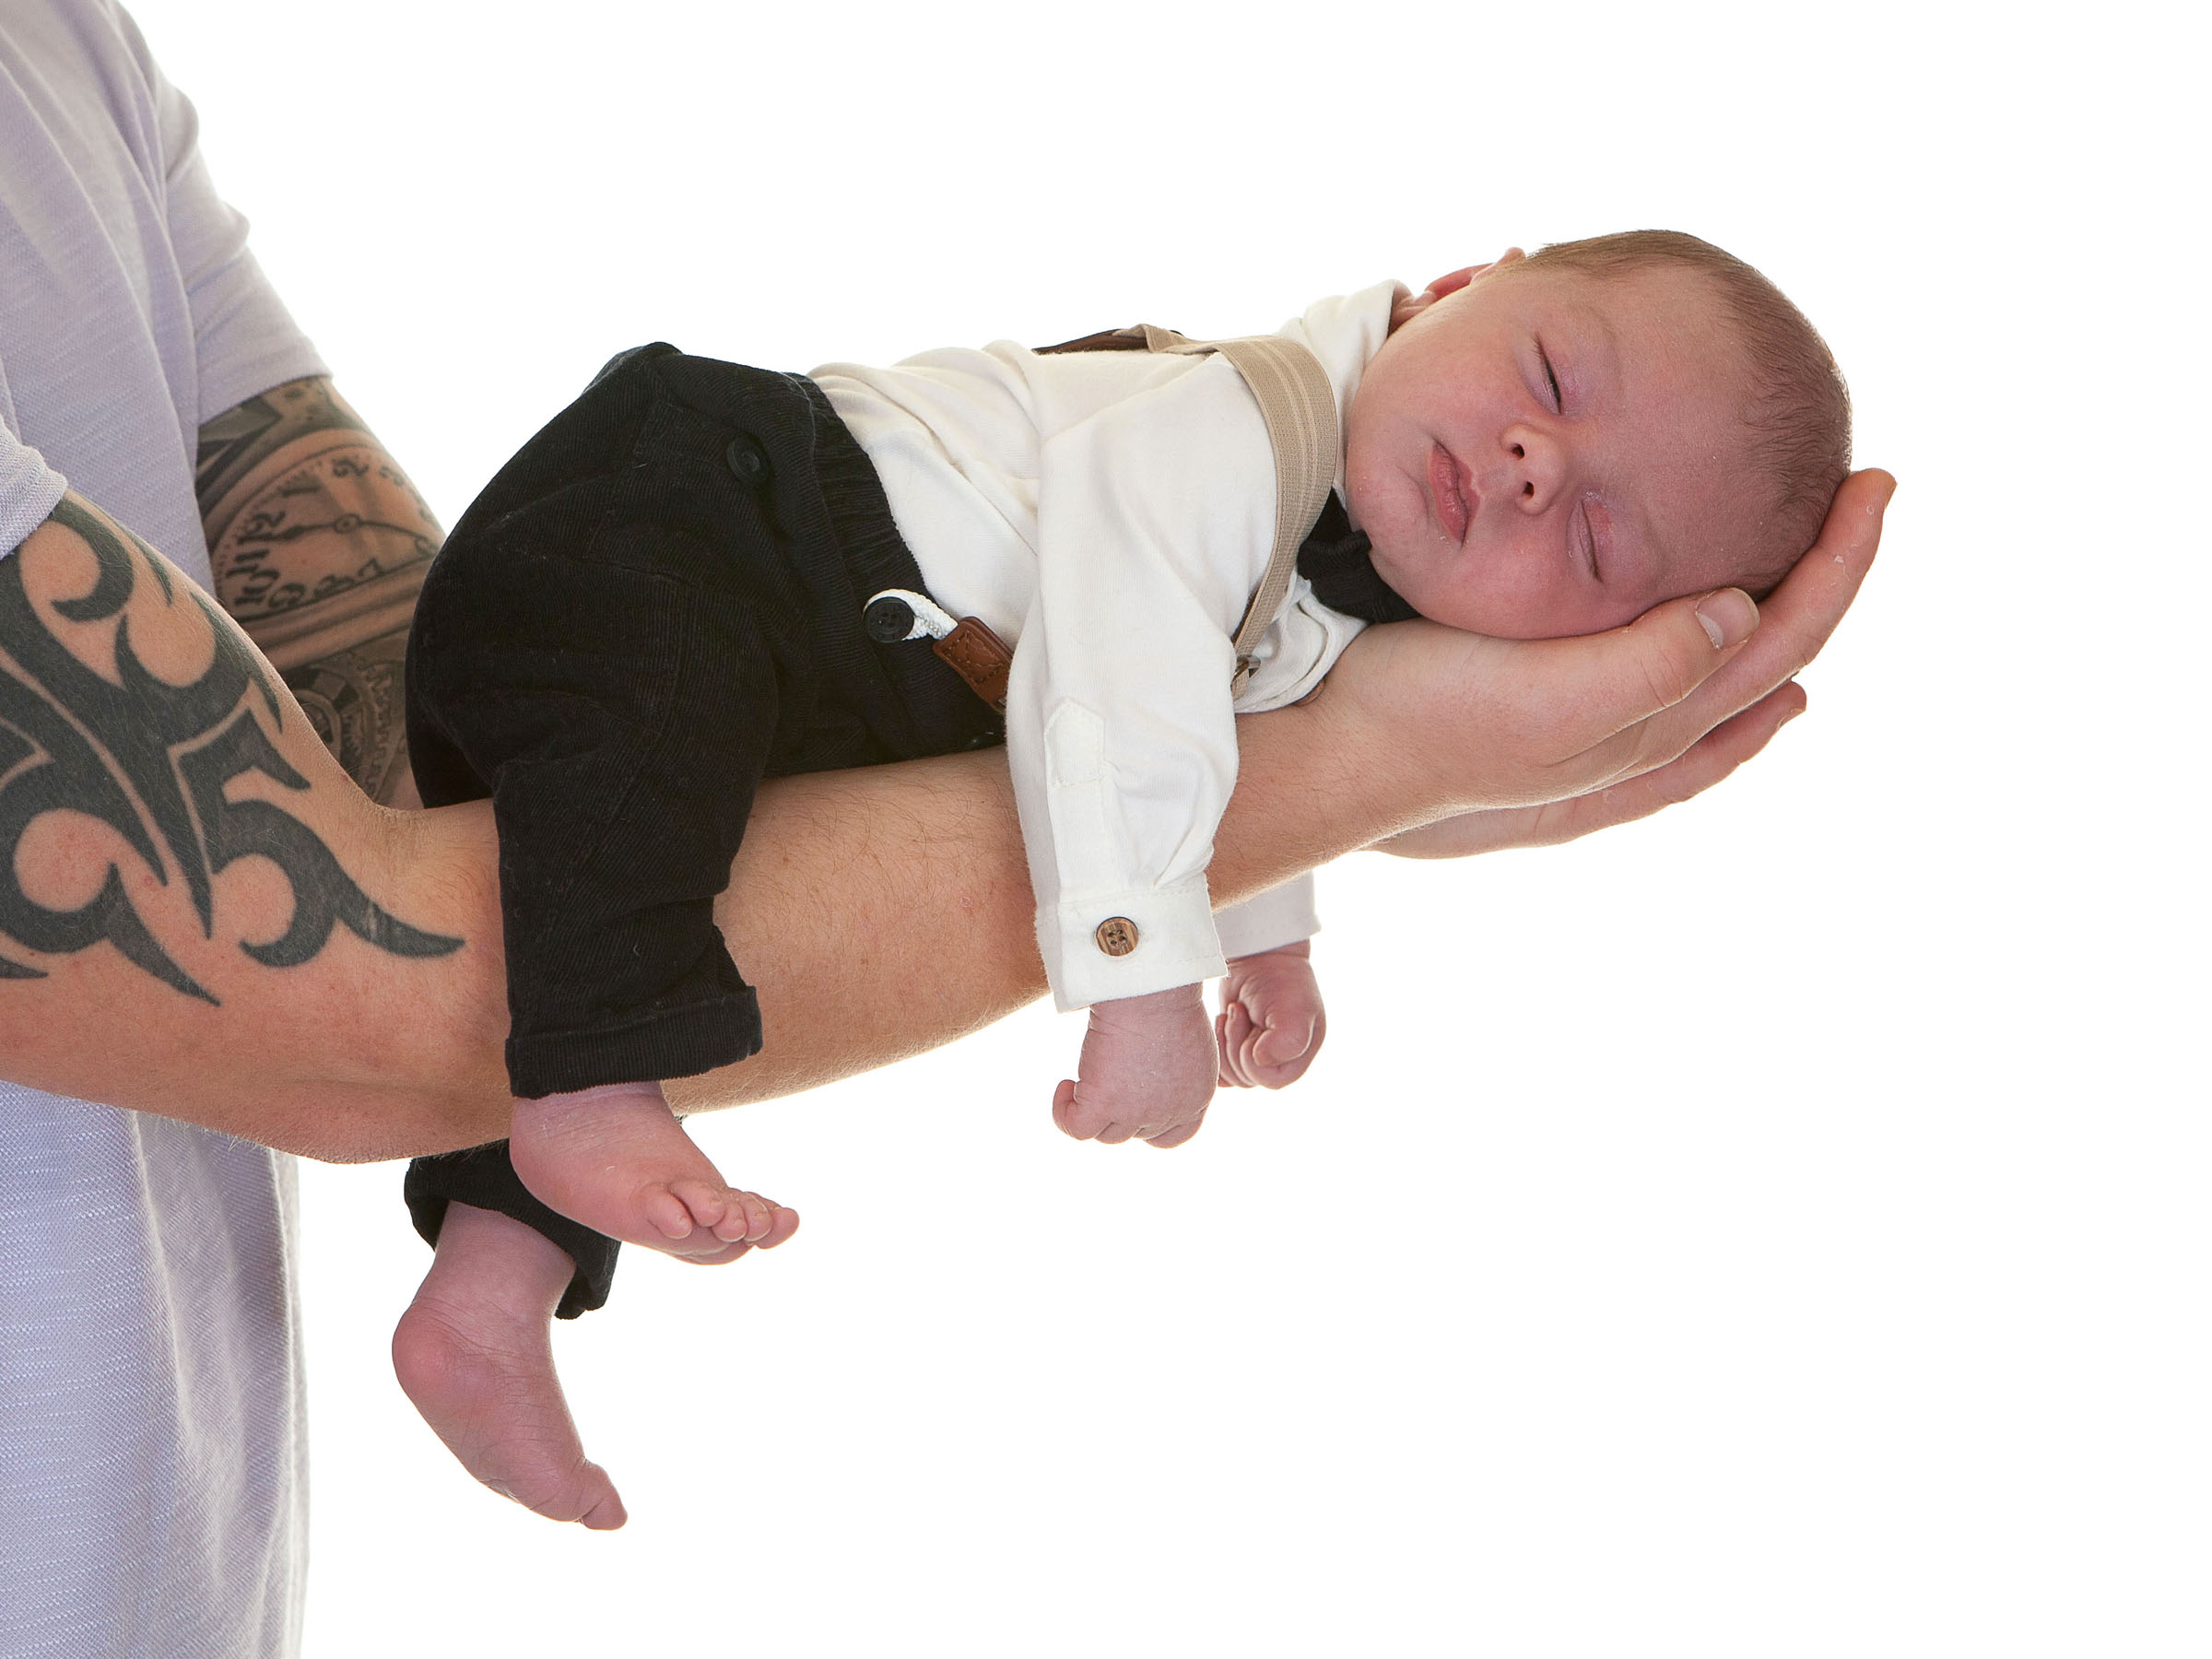 newborn baby sleeps with arms and legs dangling down